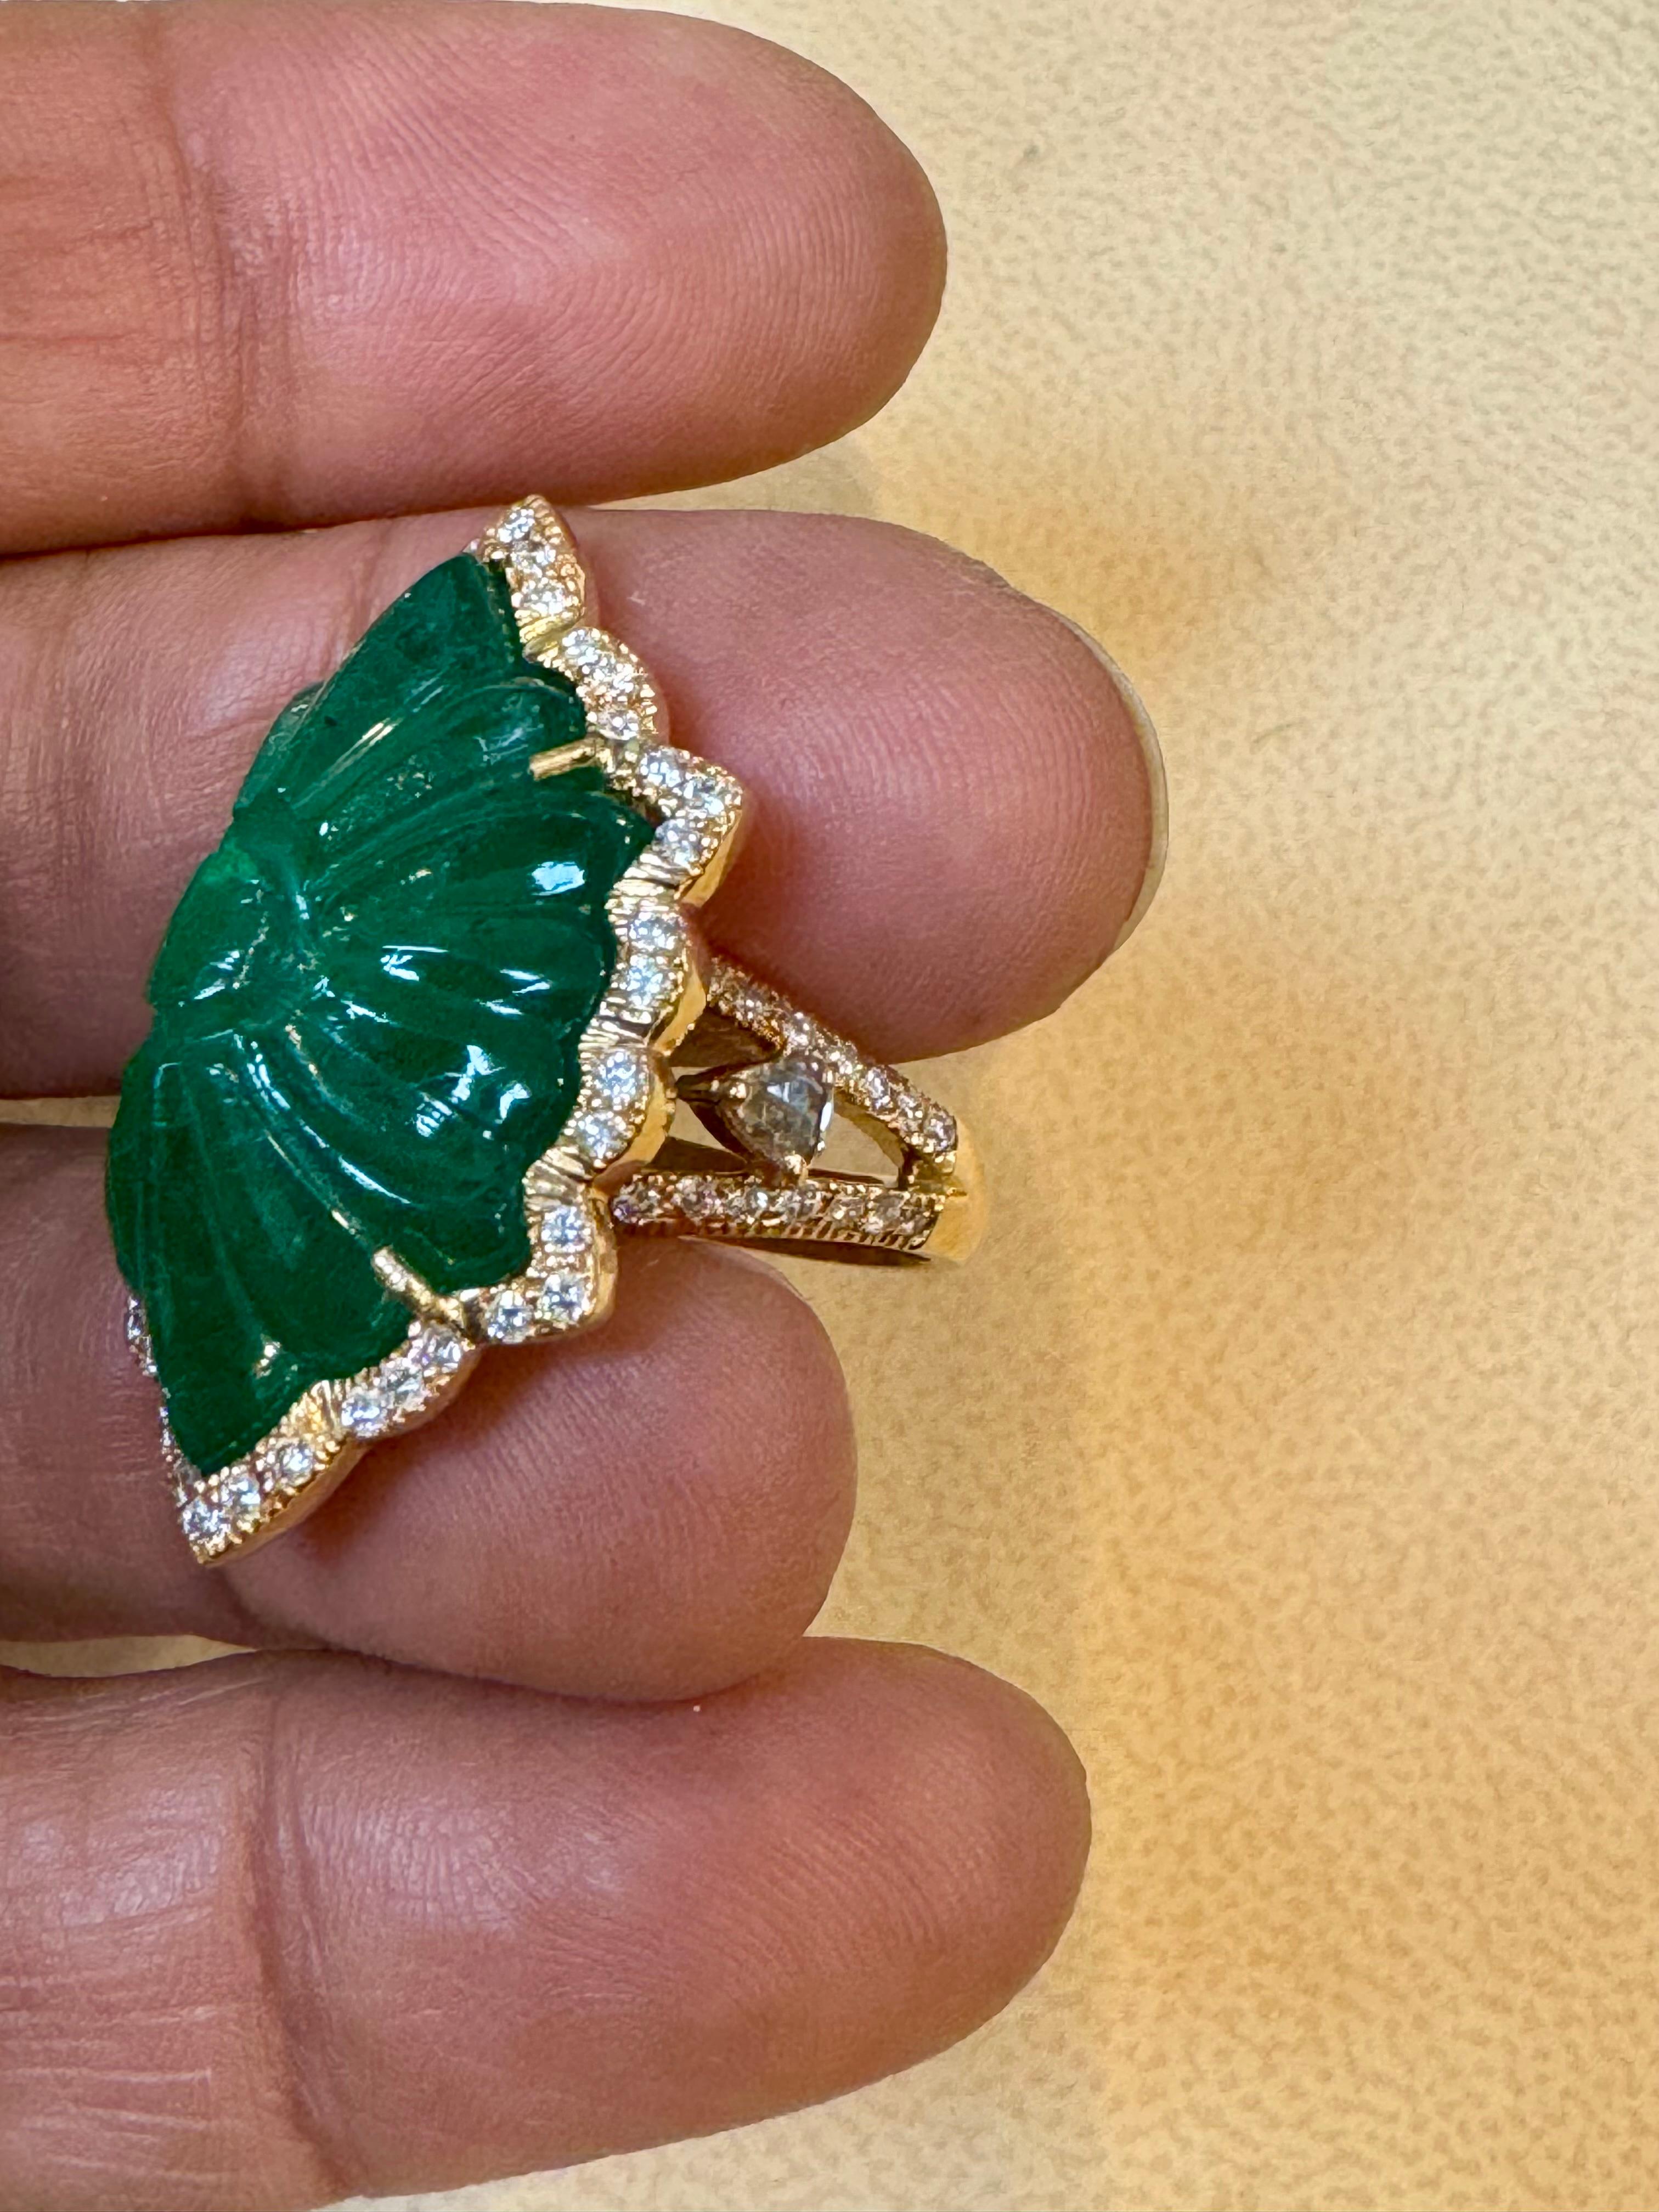 Vintage 12 Ct Natural Carved Emerald & 1.5 Ct Diamond Ring 18 Kt Yellow Gold For Sale 1